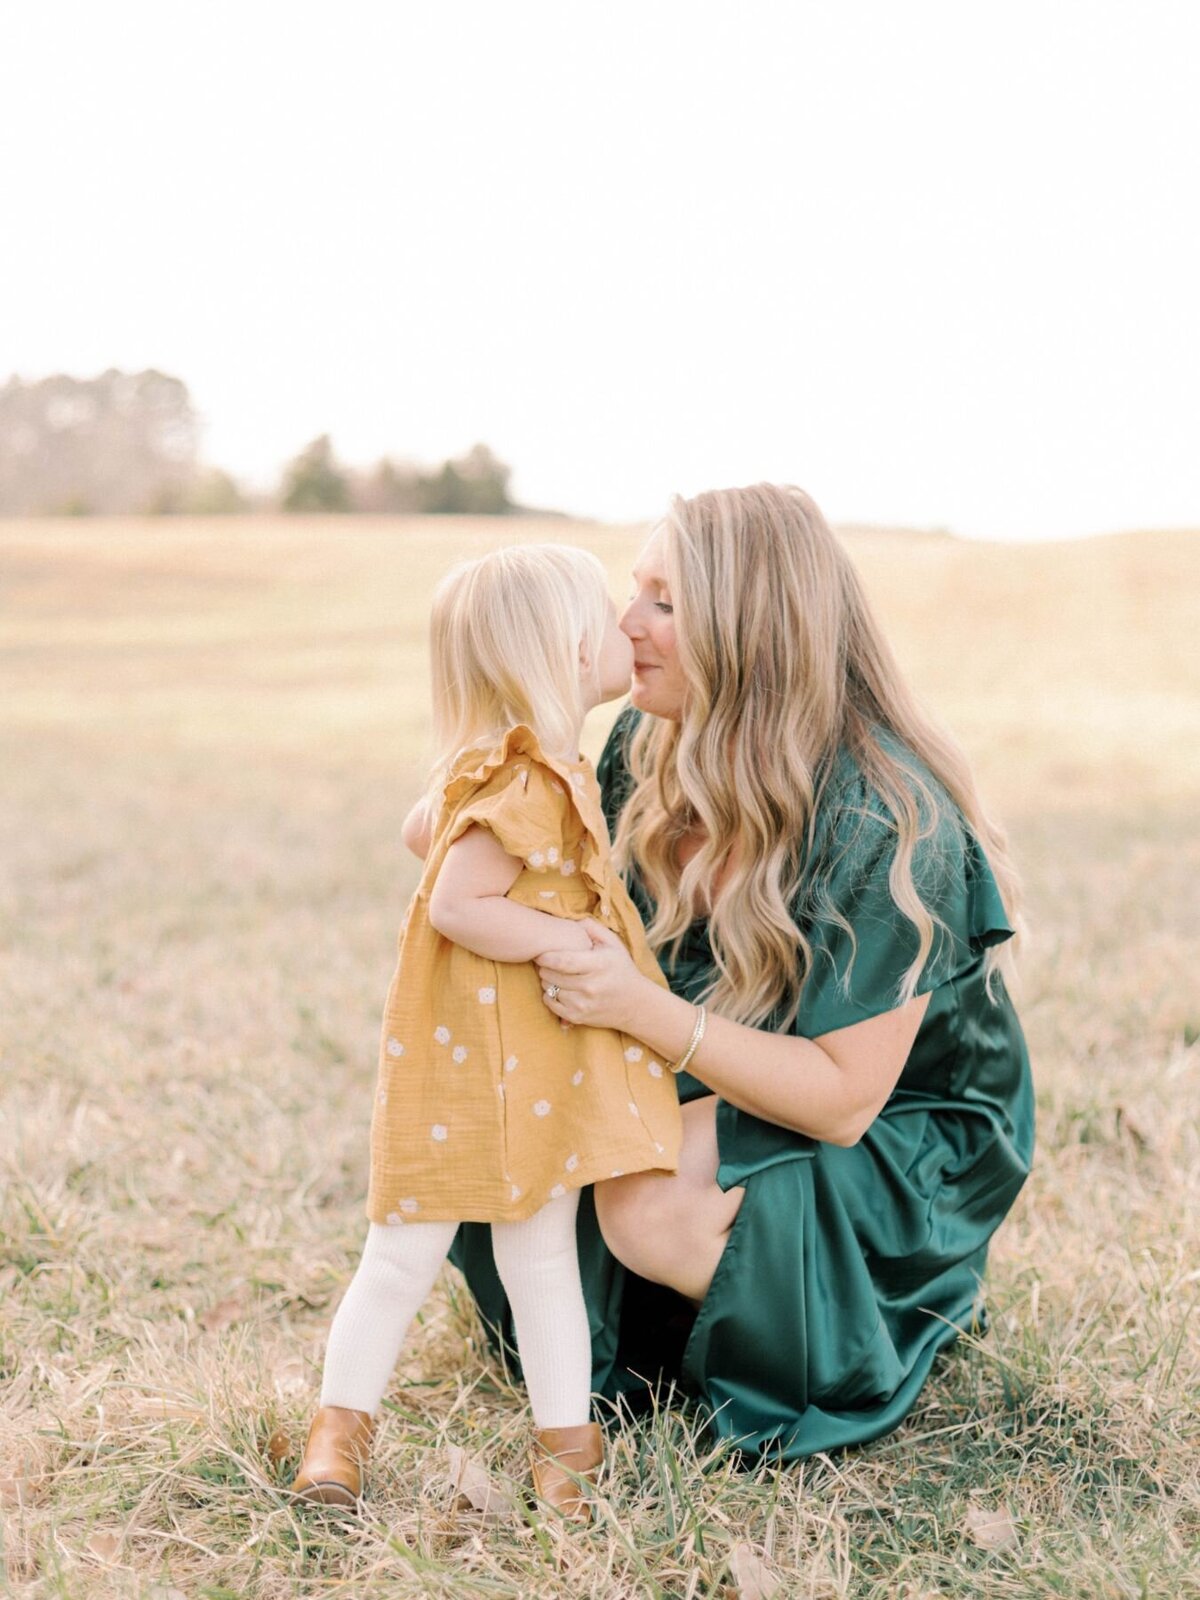 Mother kneels down to kiss daughter in grass field.